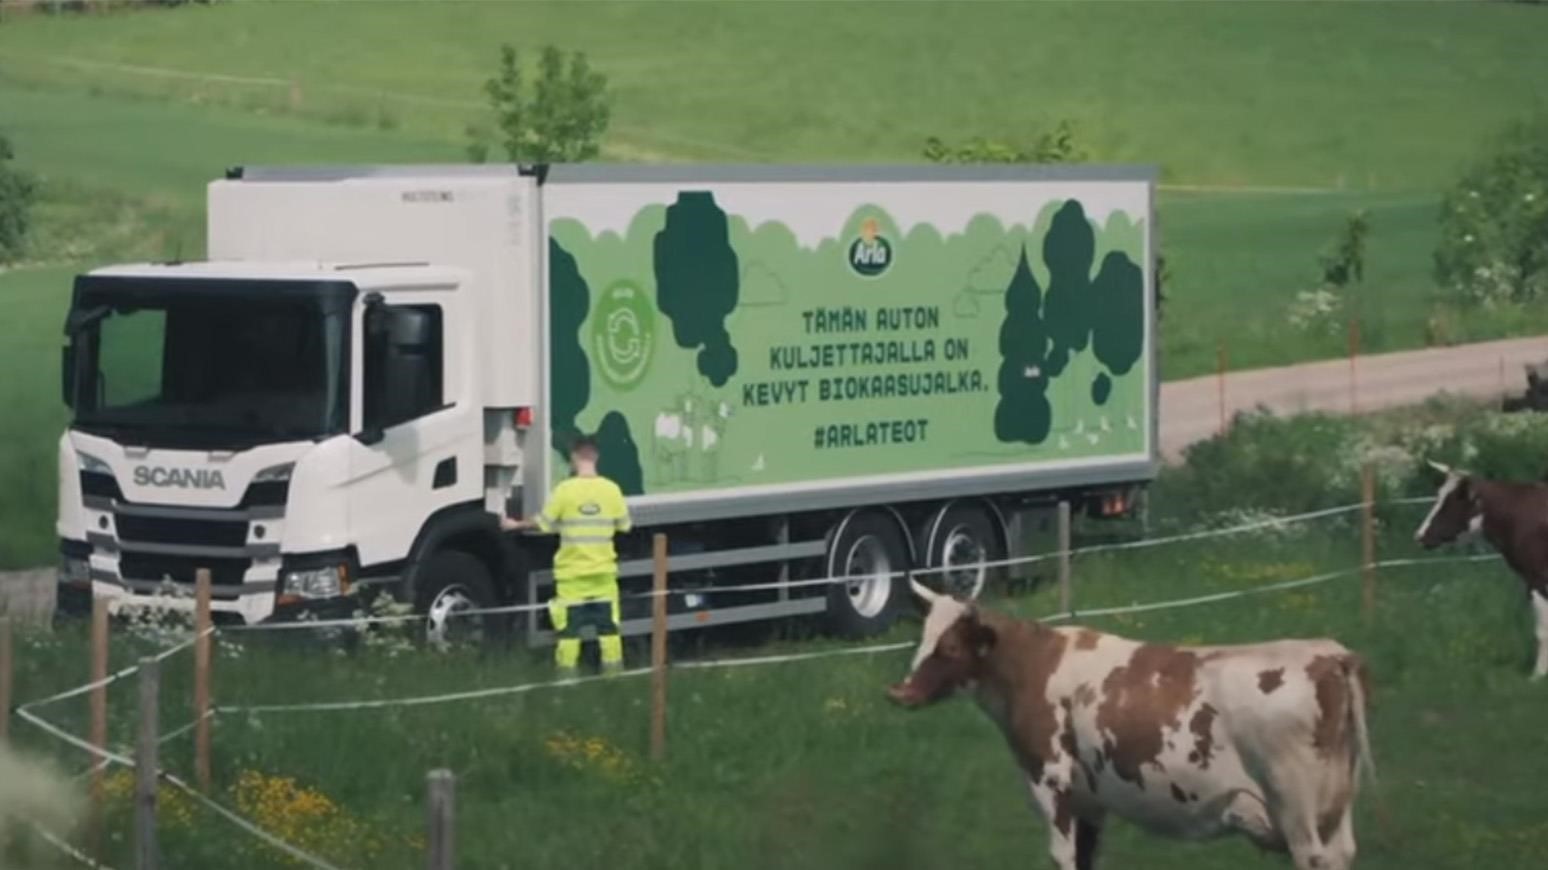 Arla Foods Deploys Scania Biogas Trucks To Reduce Carbon Emissions